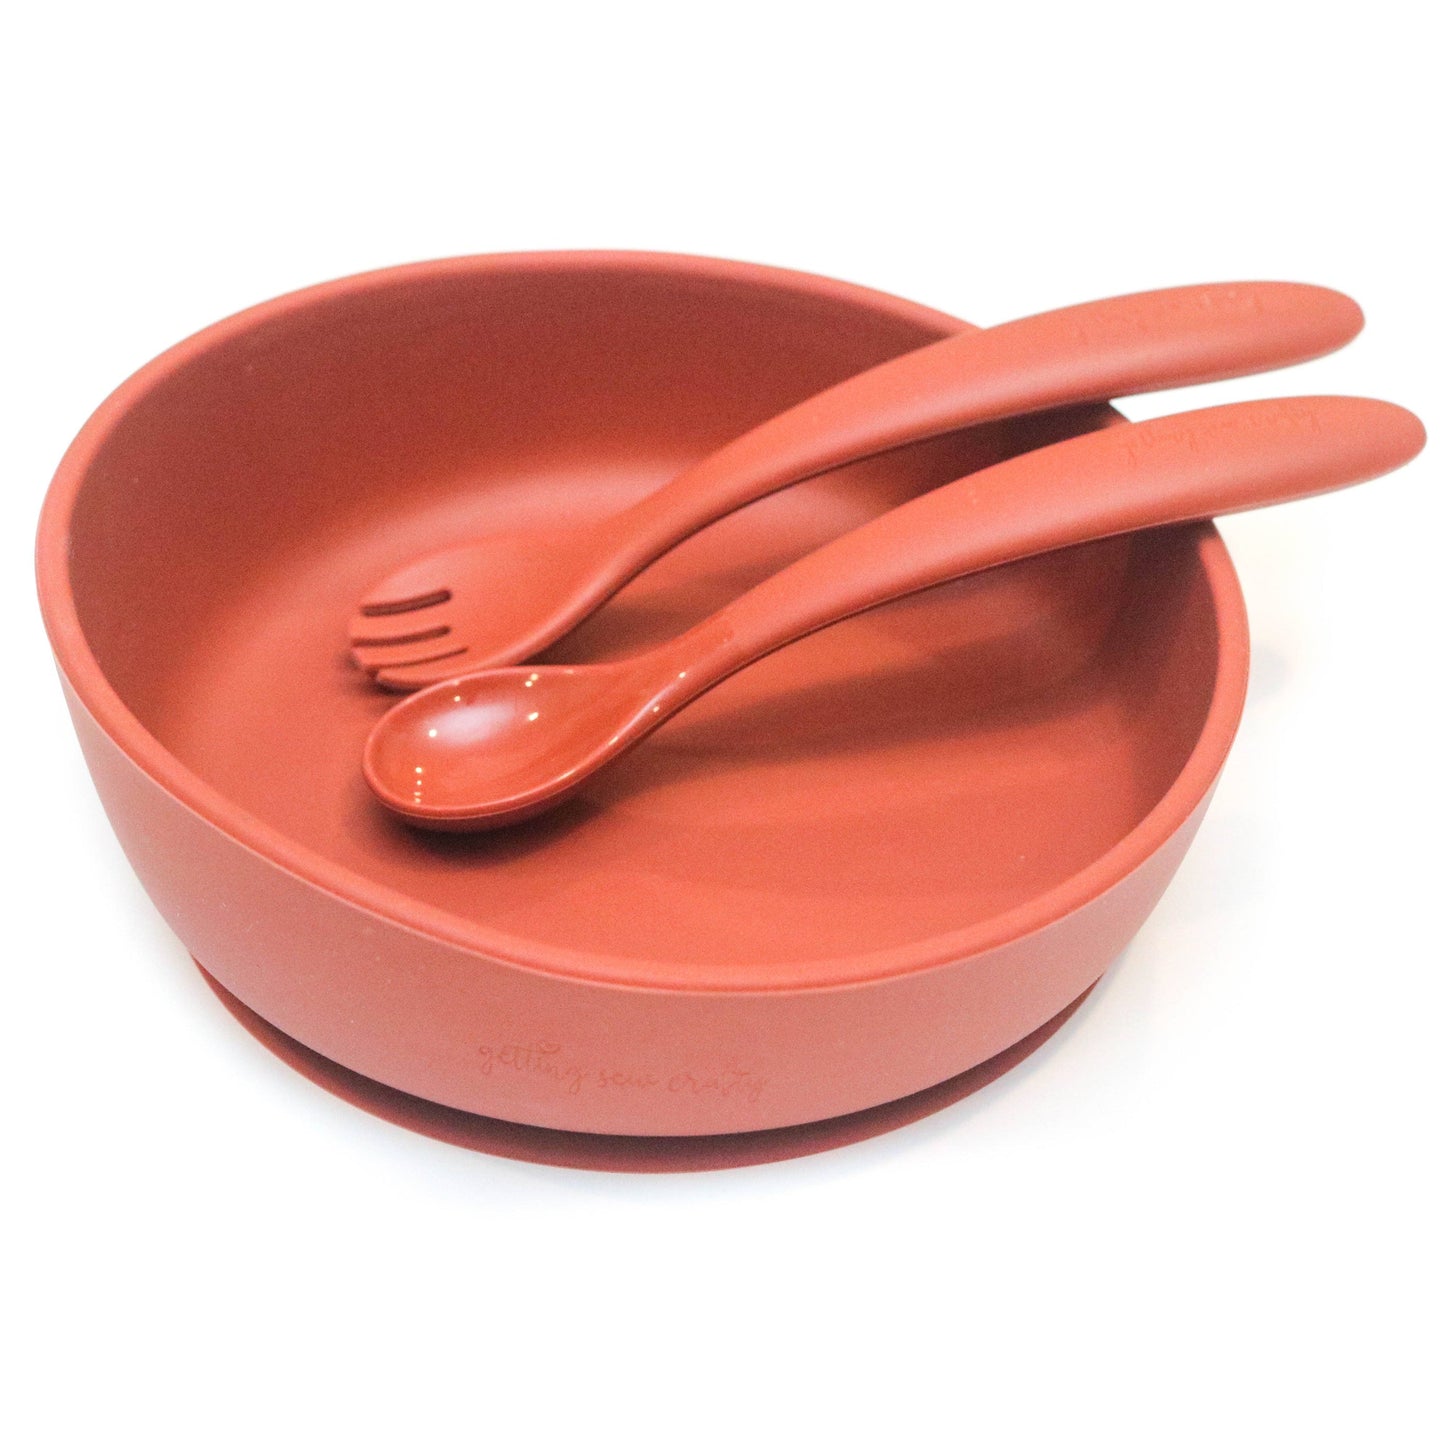 Silicone Bowl & Utensil Set - Multiple Colors Available